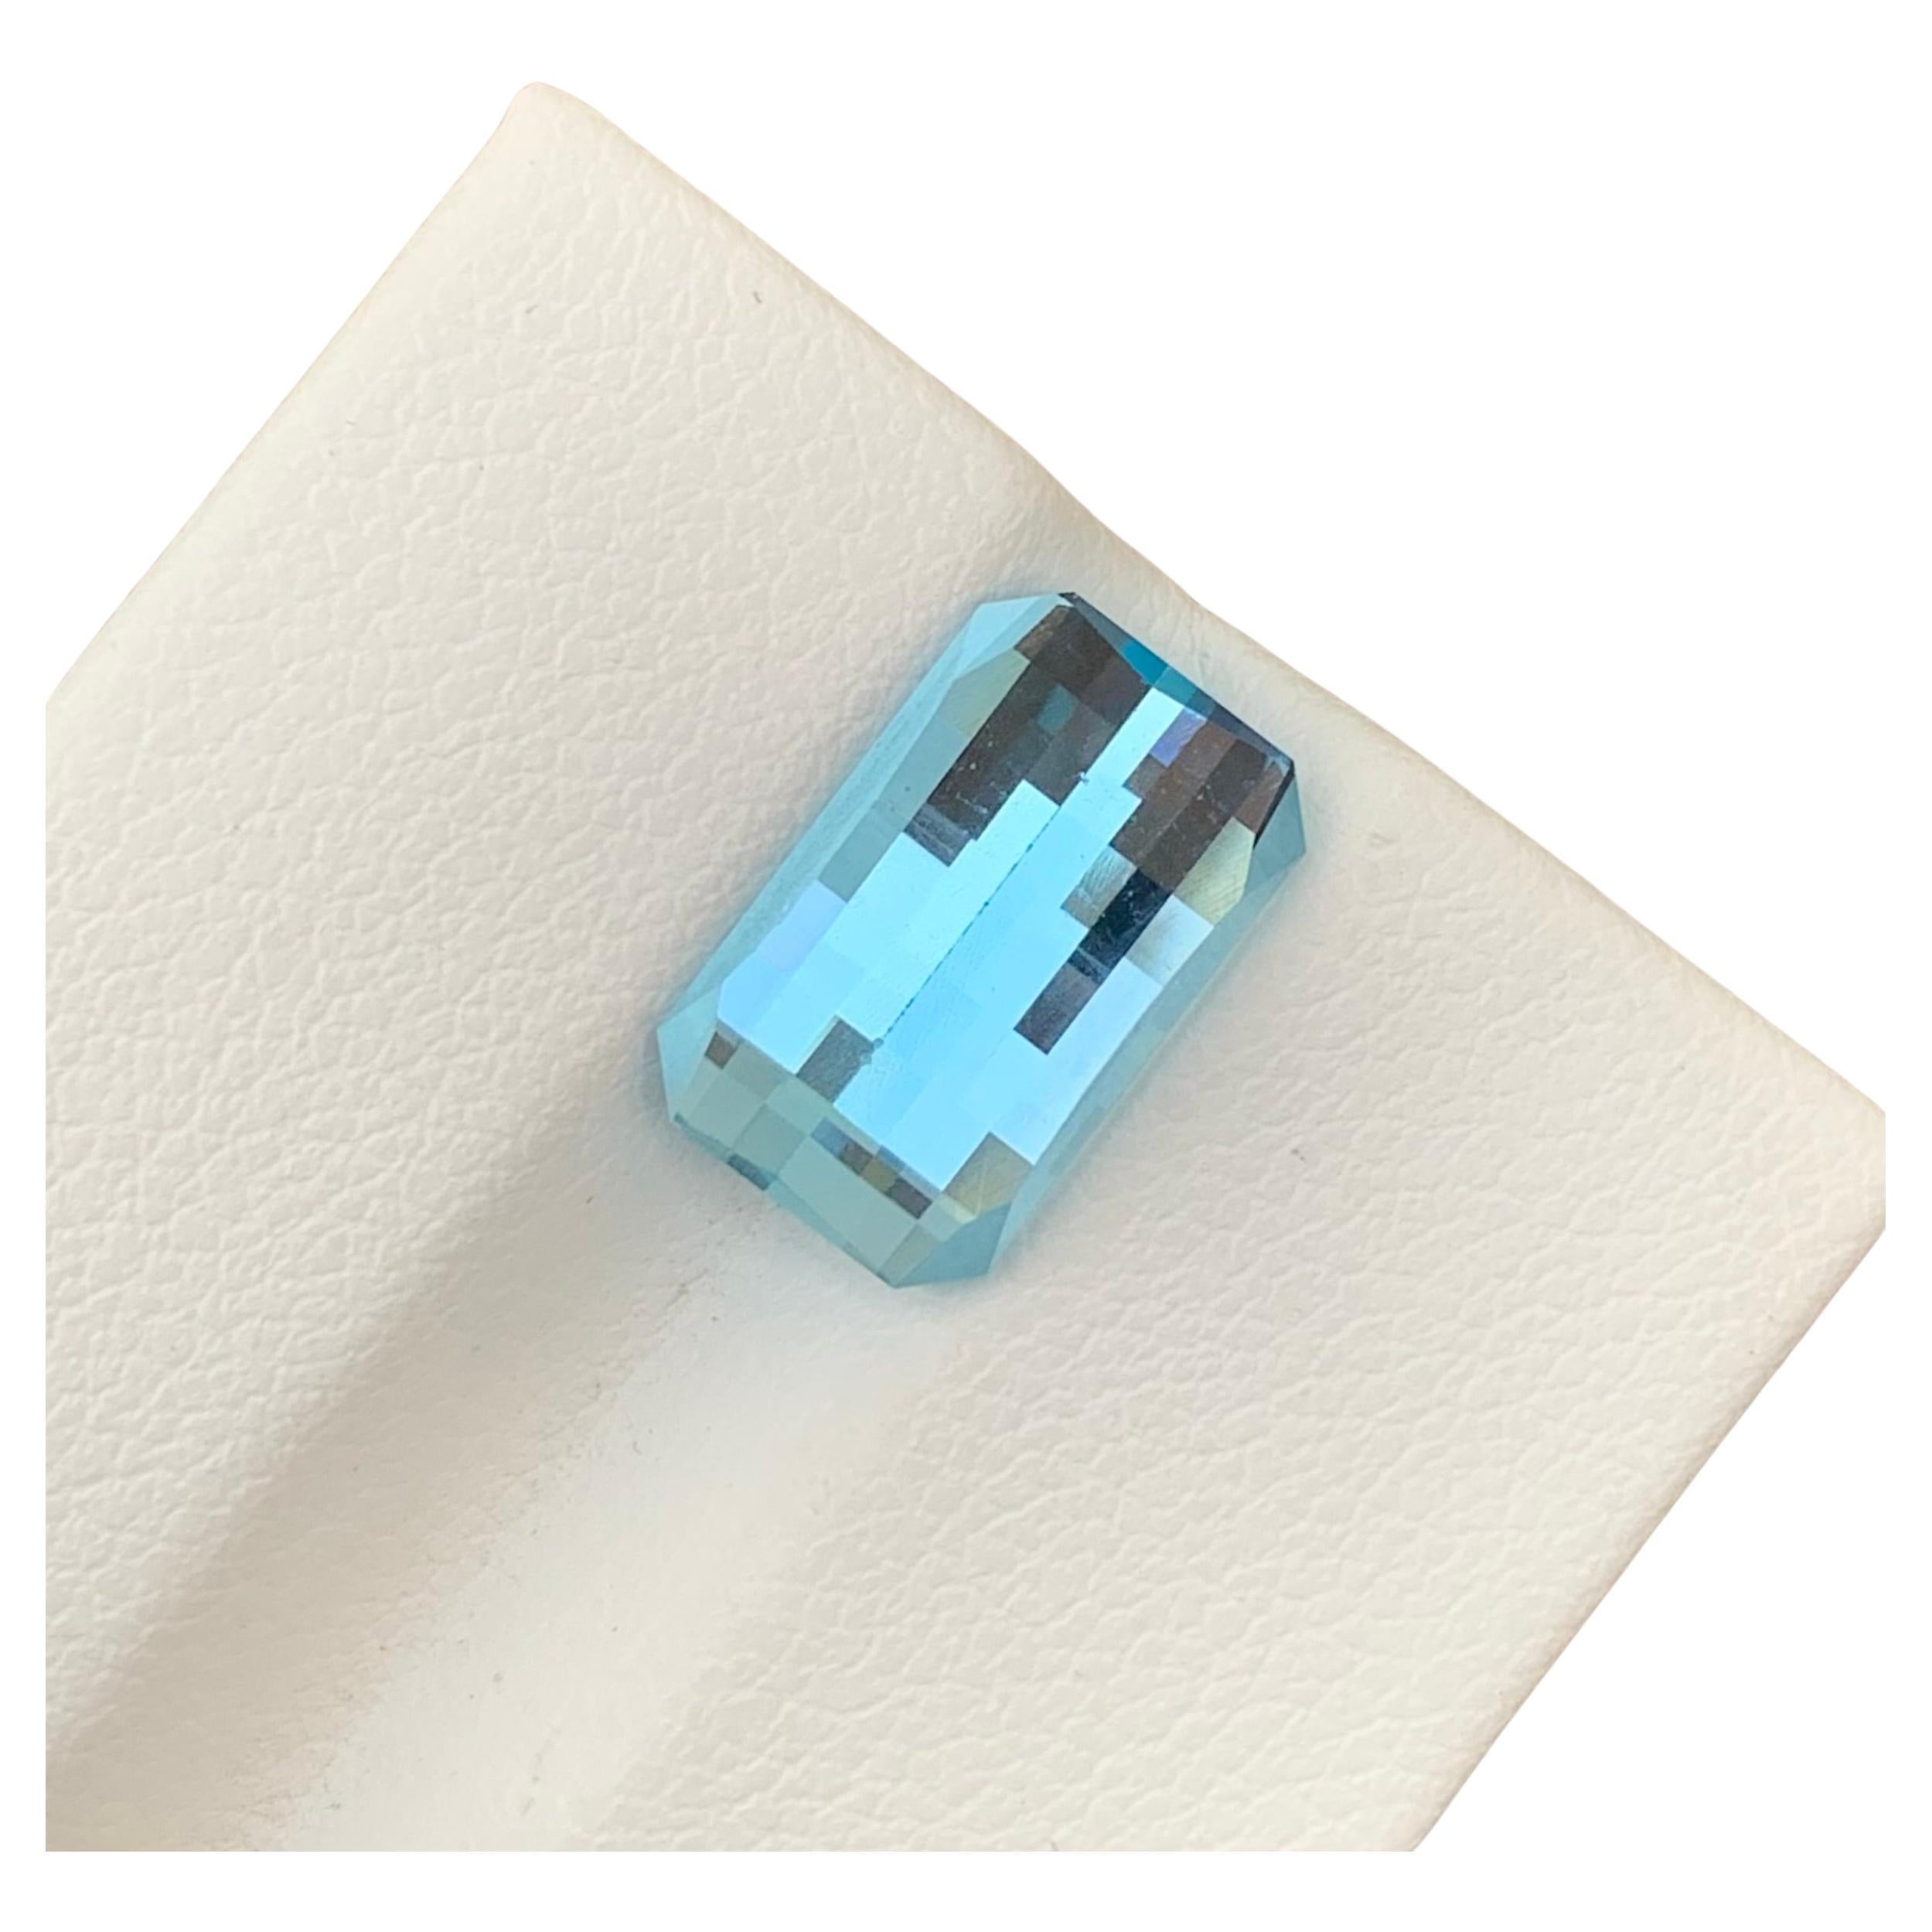 Stunning 6.15 Carats Pixelated Cut Loose Sky Blue Topaz Earth Mine Ring Gem For Sale